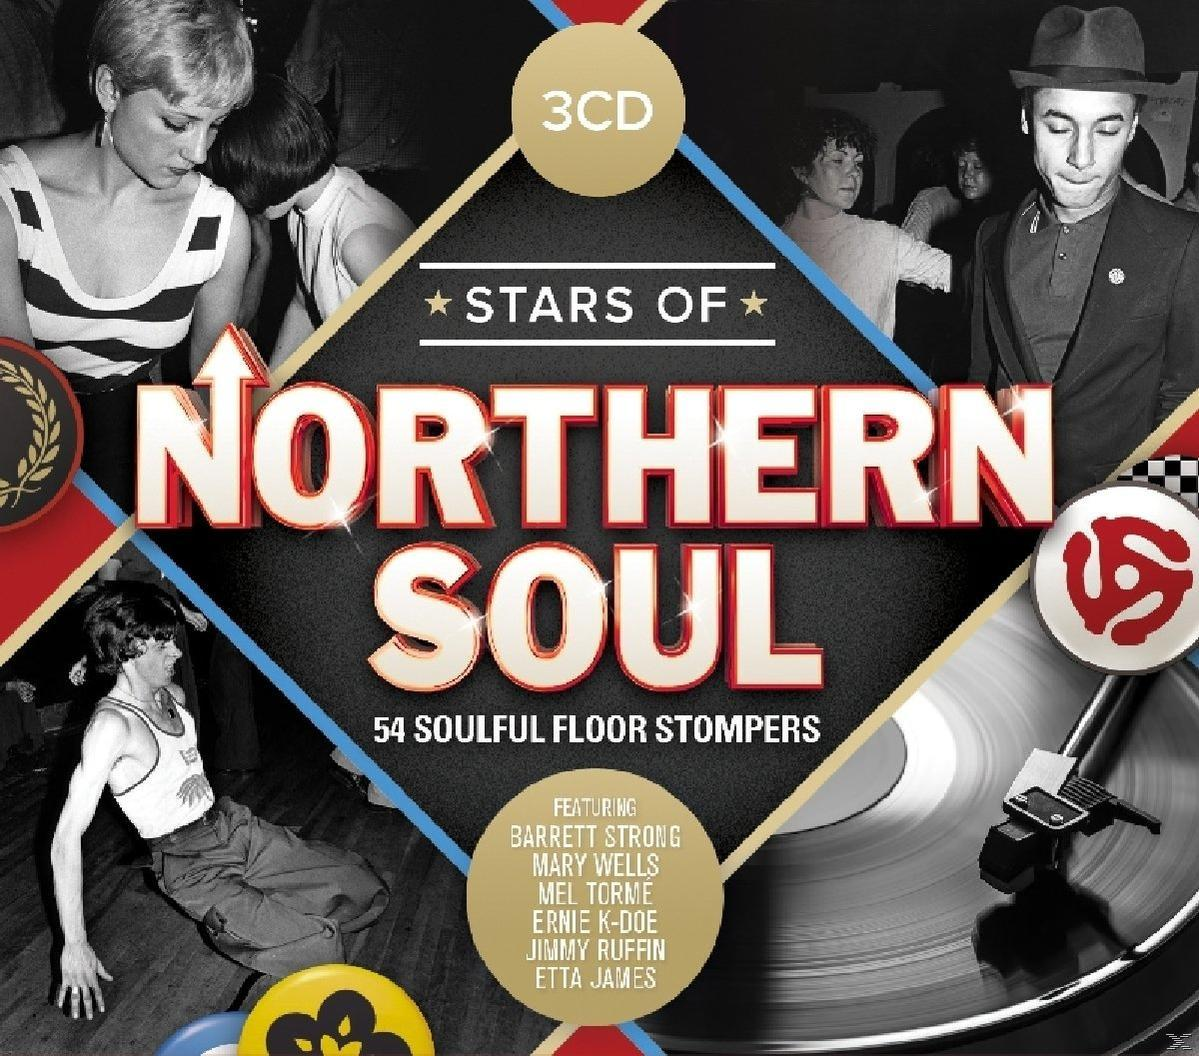 (CD) - Of - Soul Stars Northern VARIOUS